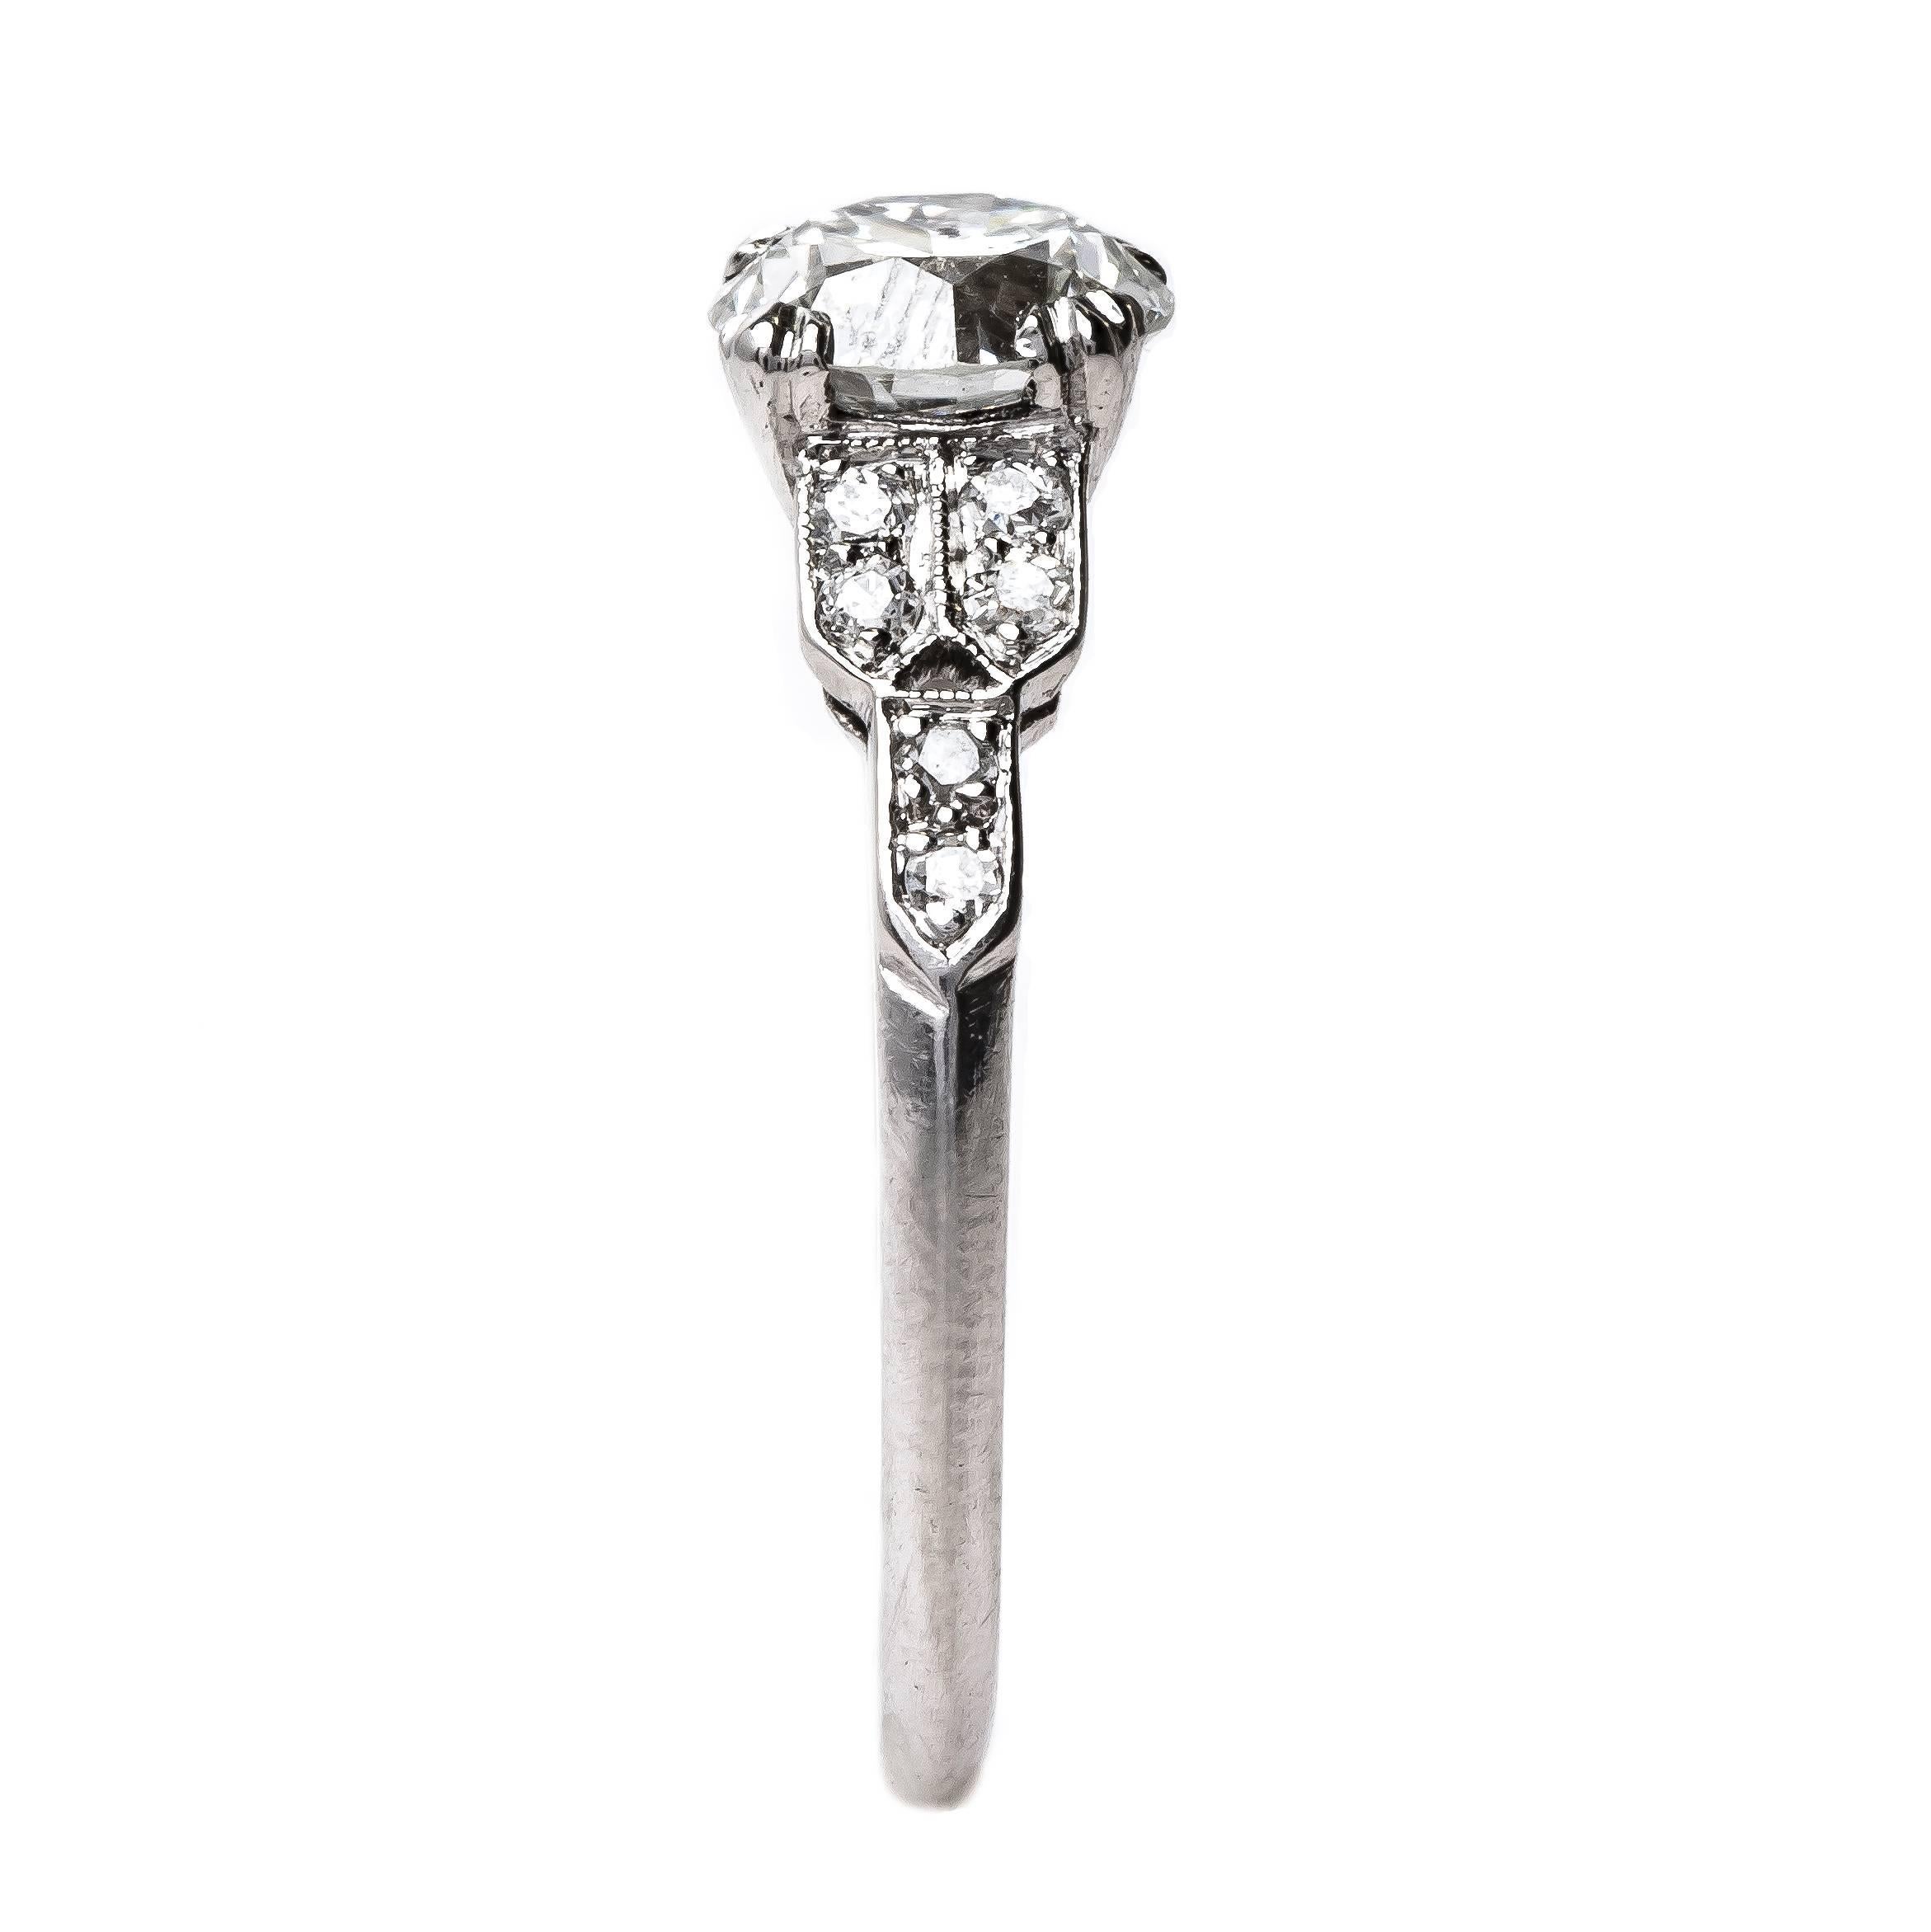 Women's Sparkling Art Deco Engagement Ring with EGL Certified Old European Cut Diamond